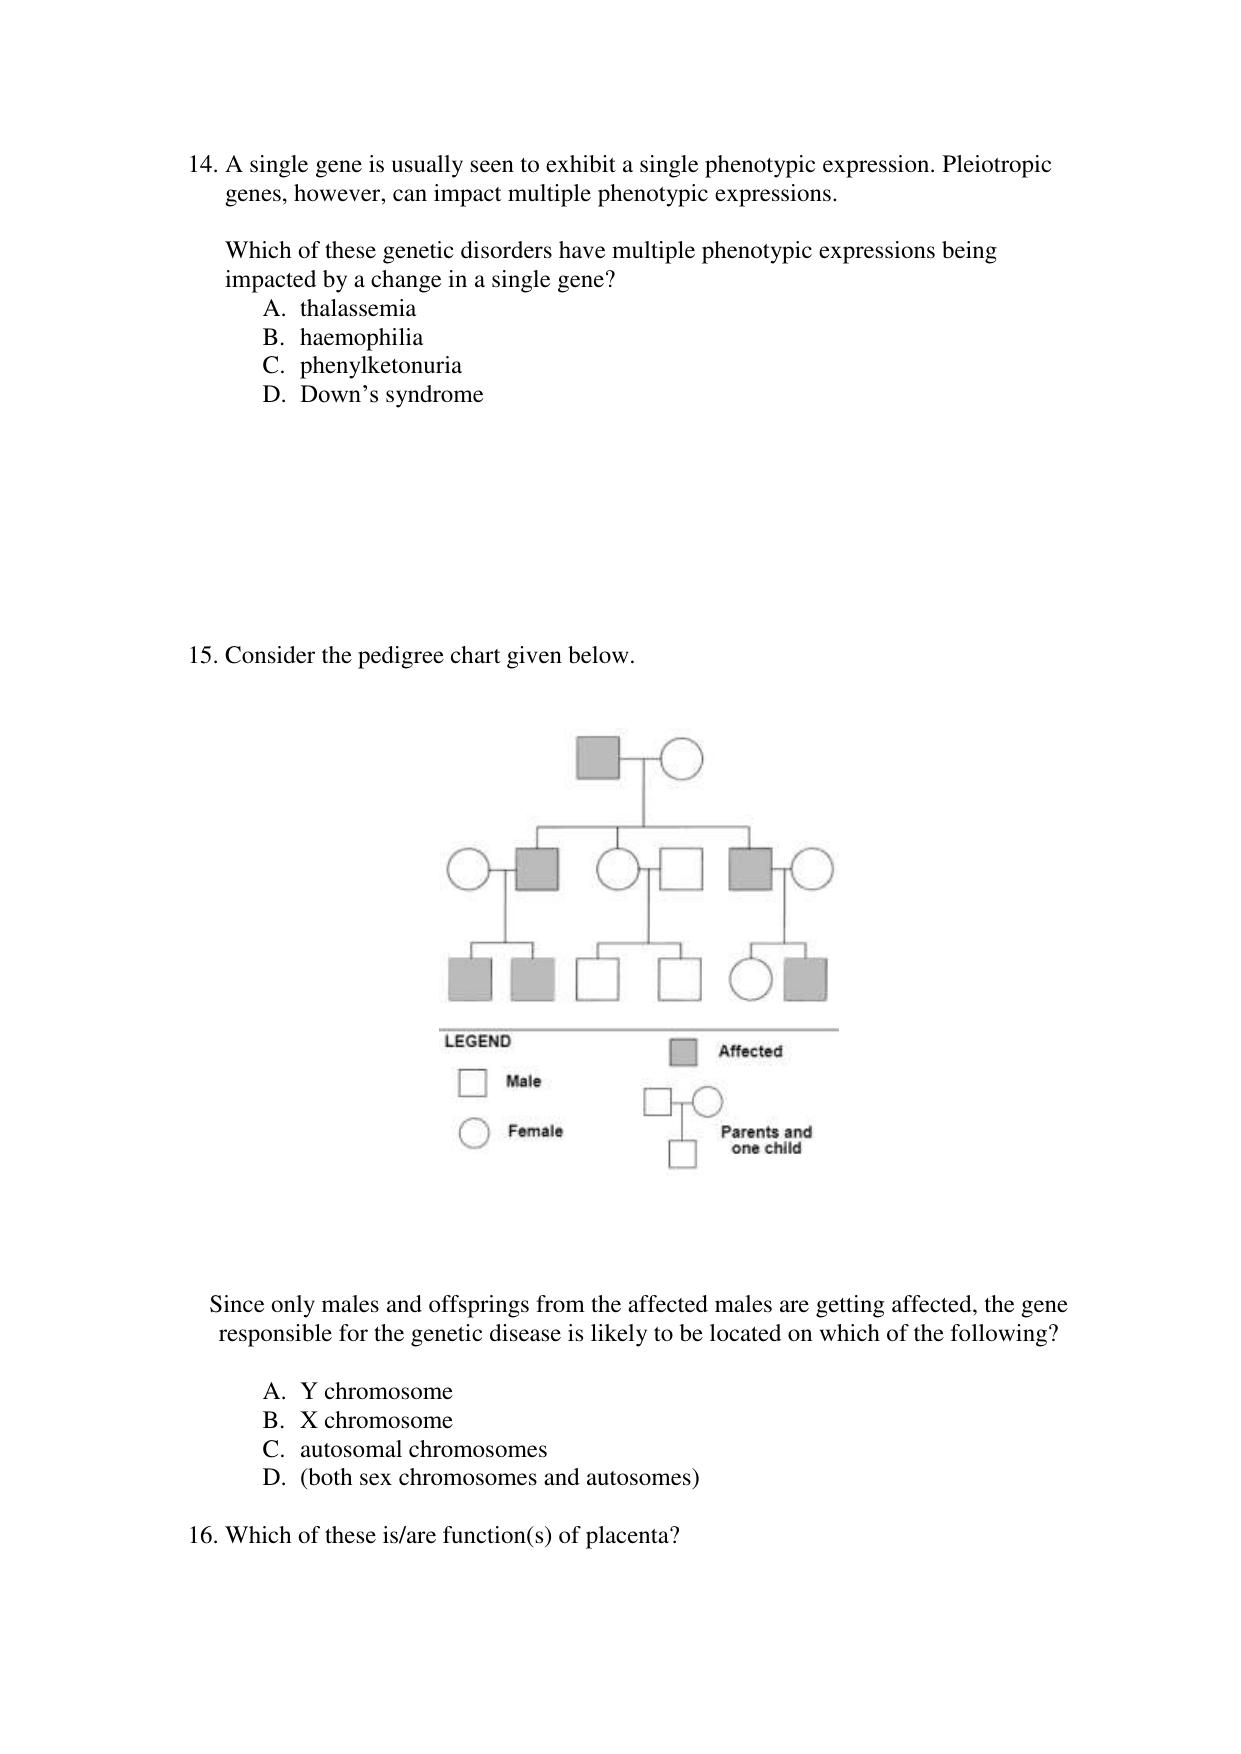 CBSE Class 12 Biology Term 1 Practice Questions 2021-22 - Page 5